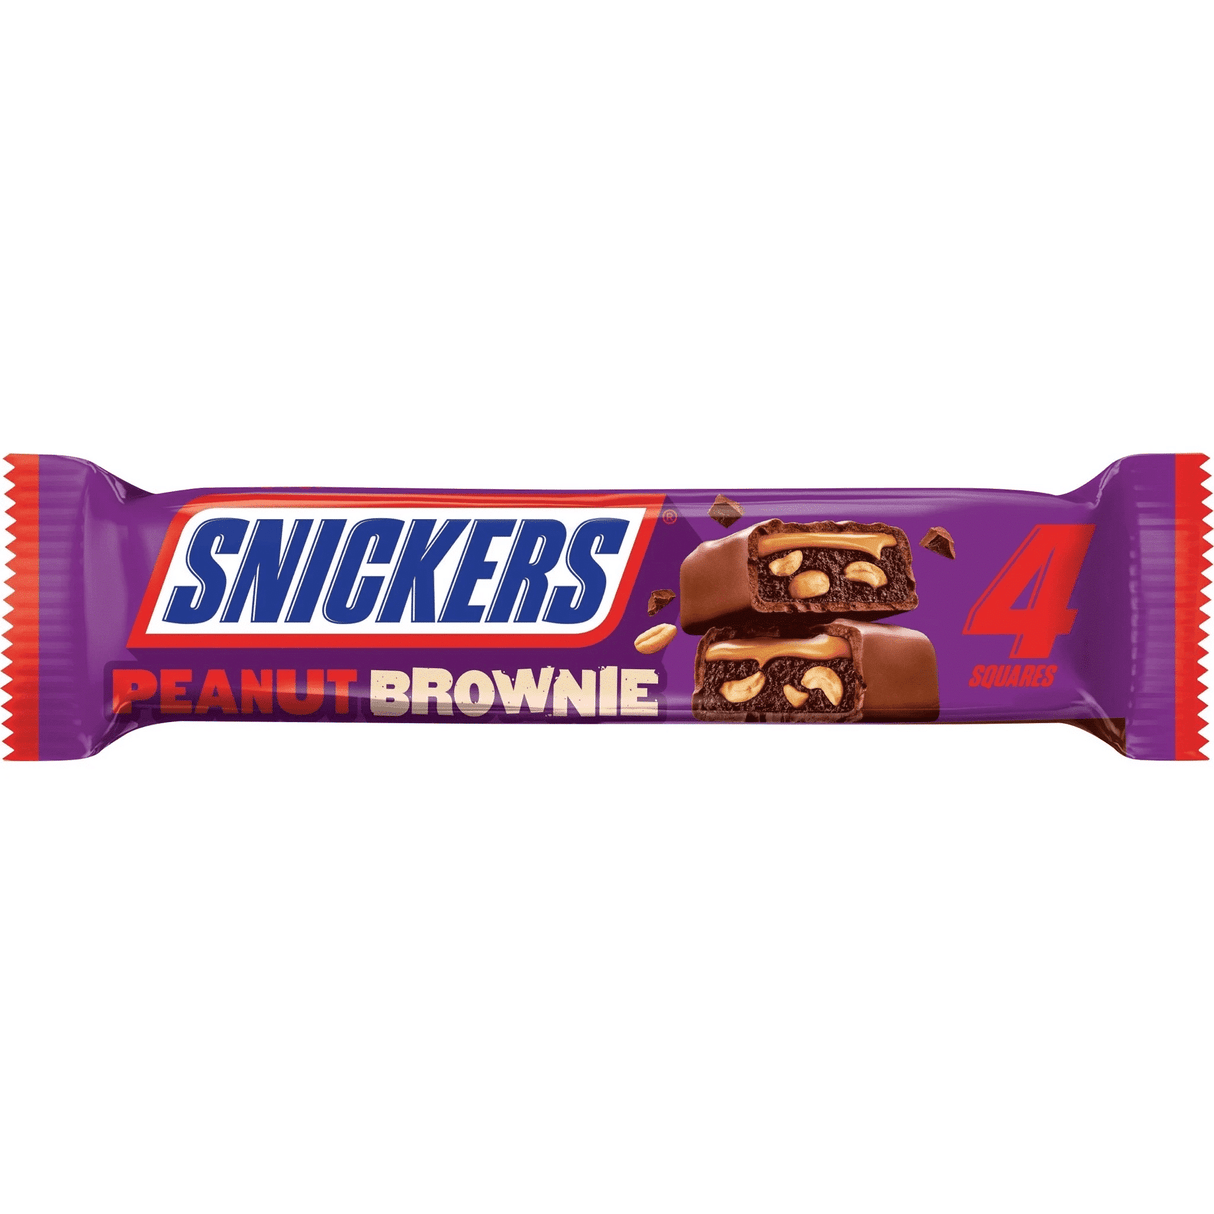 Snickers Peanut Brownie Share Size (68g)